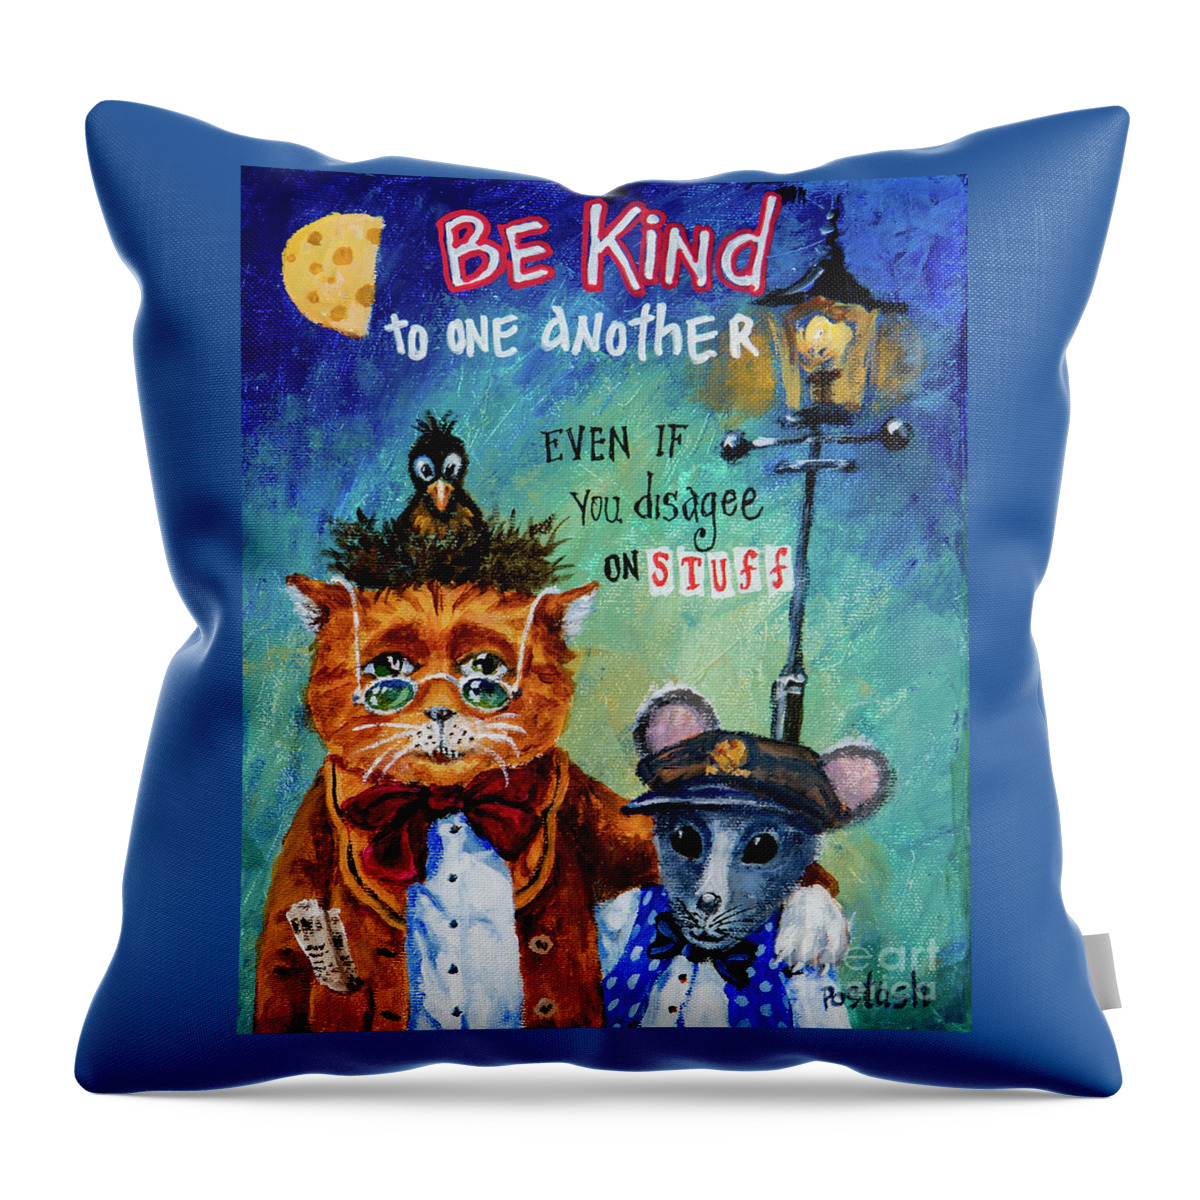 Figurative Throw Pillow featuring the painting Be Kind by Igor Postash